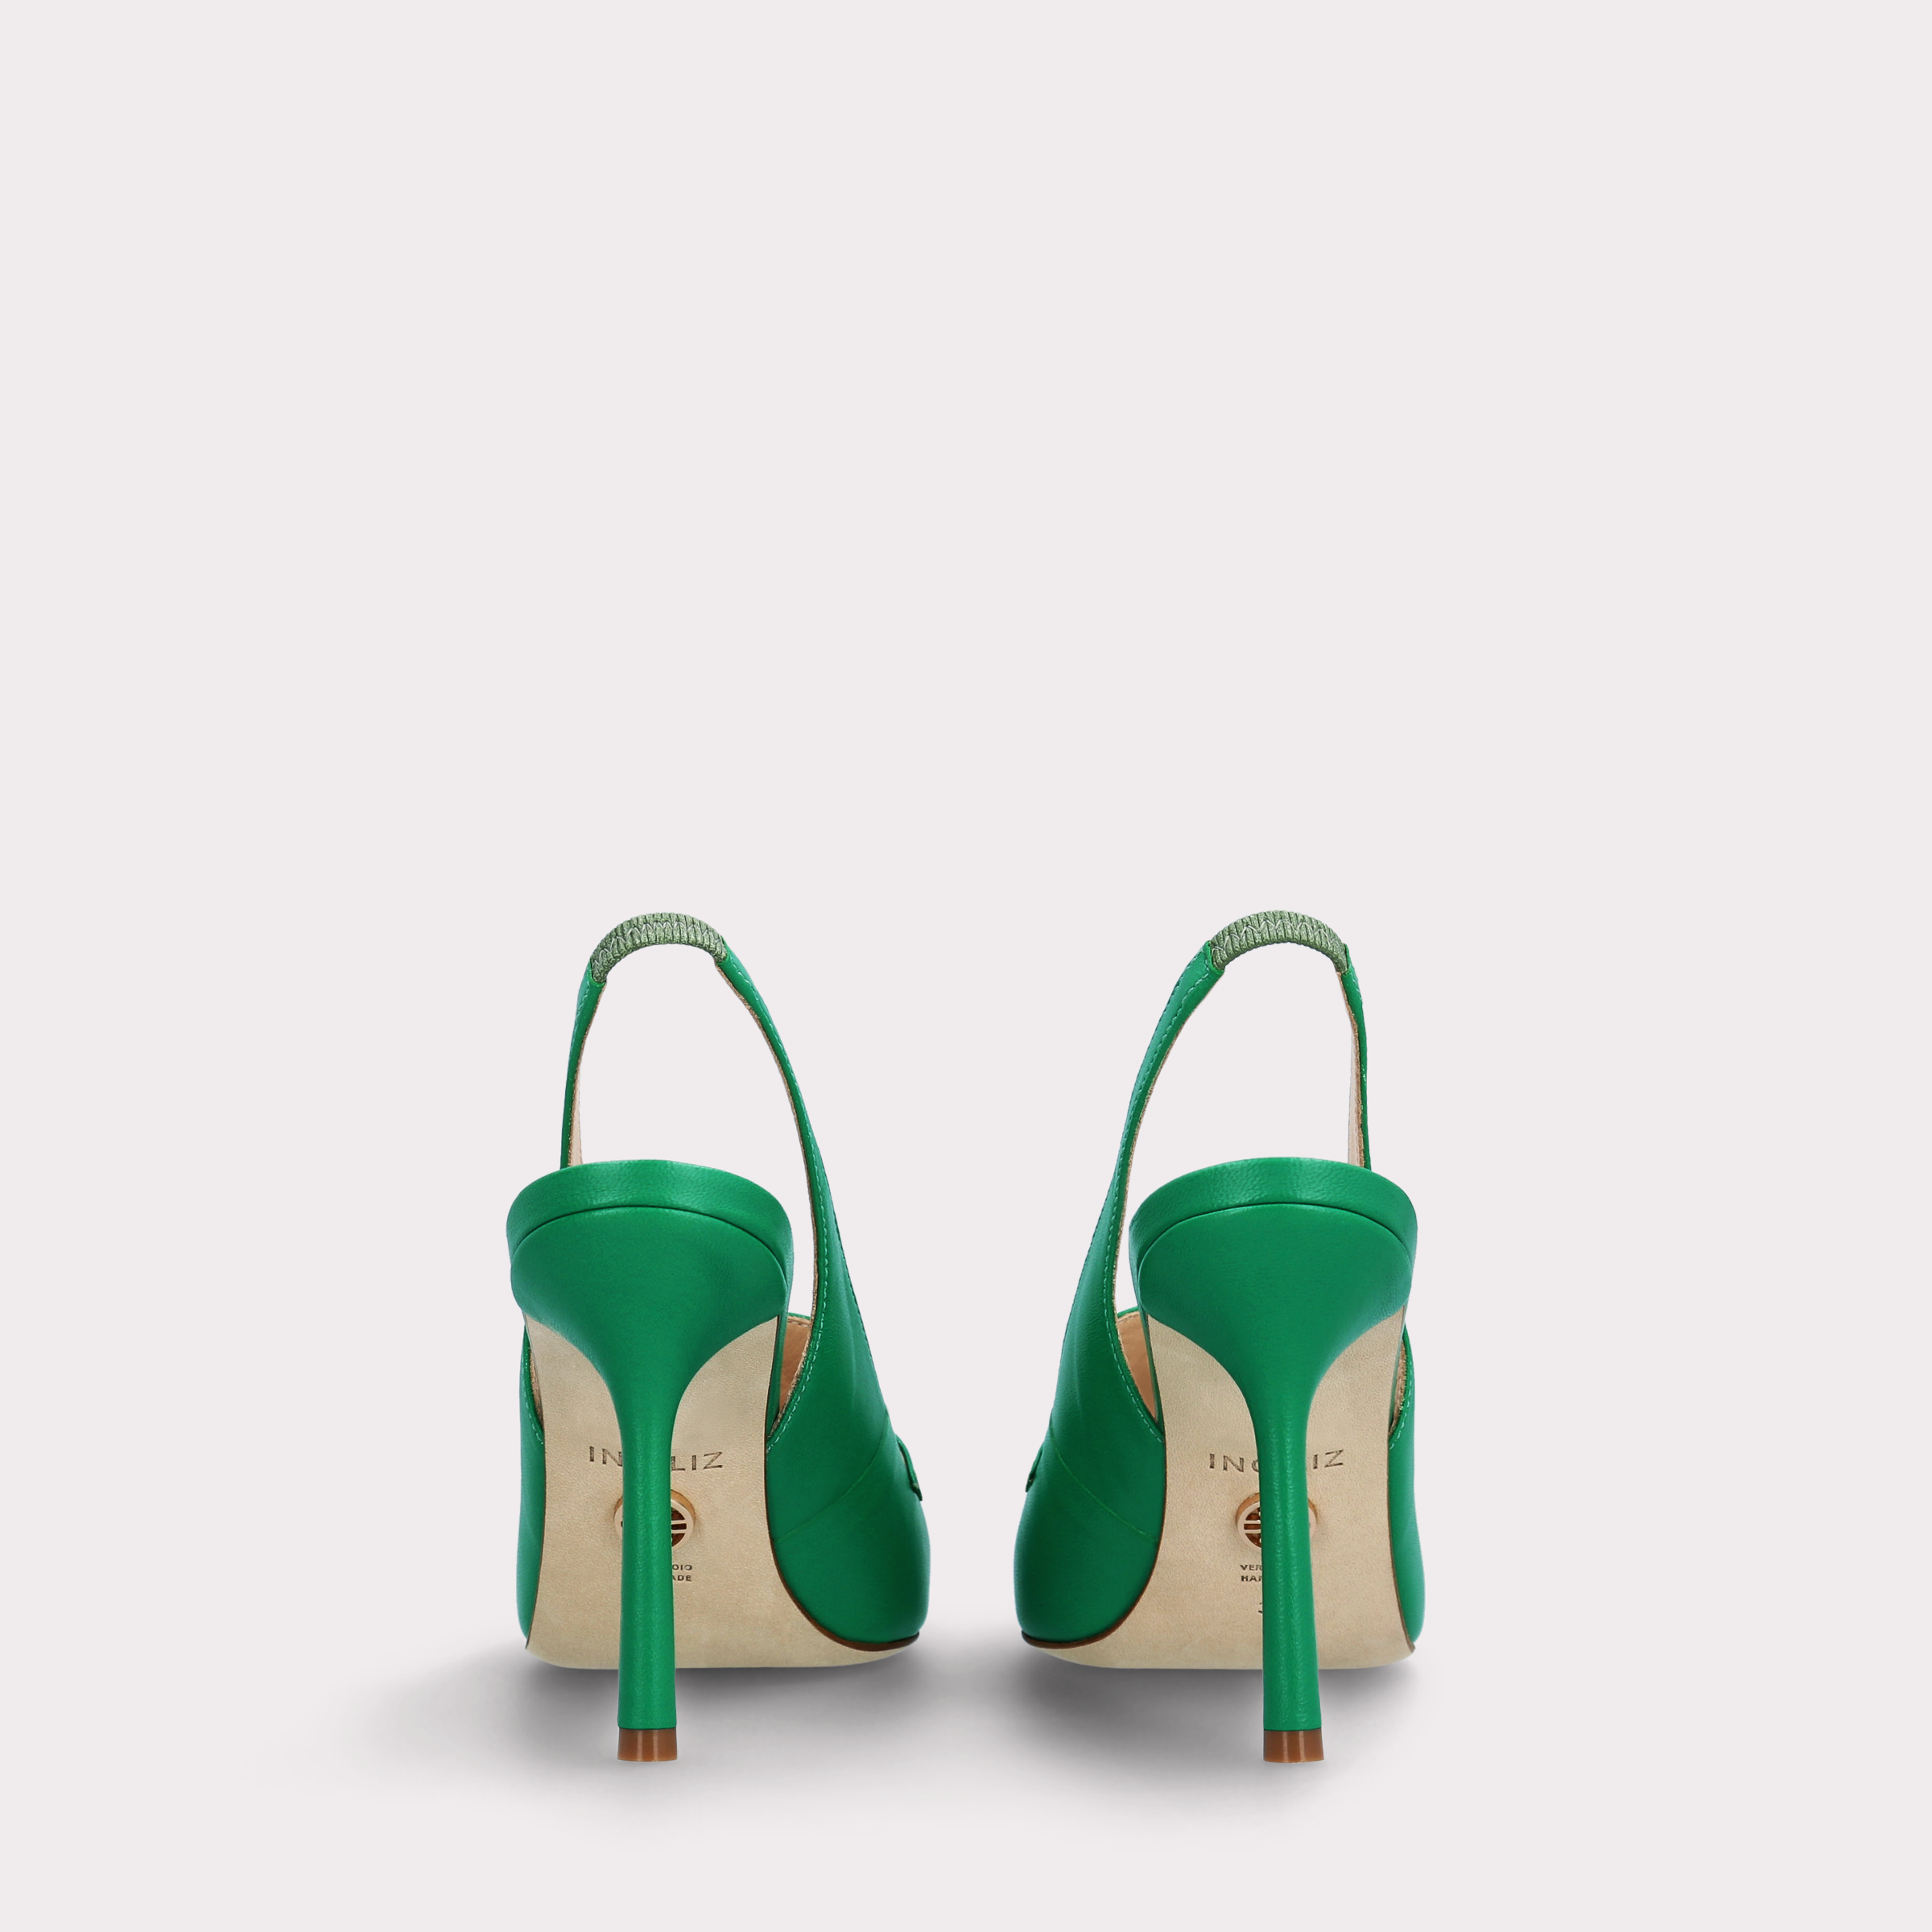 ABA 15 GREEN LEATHER PUMPS